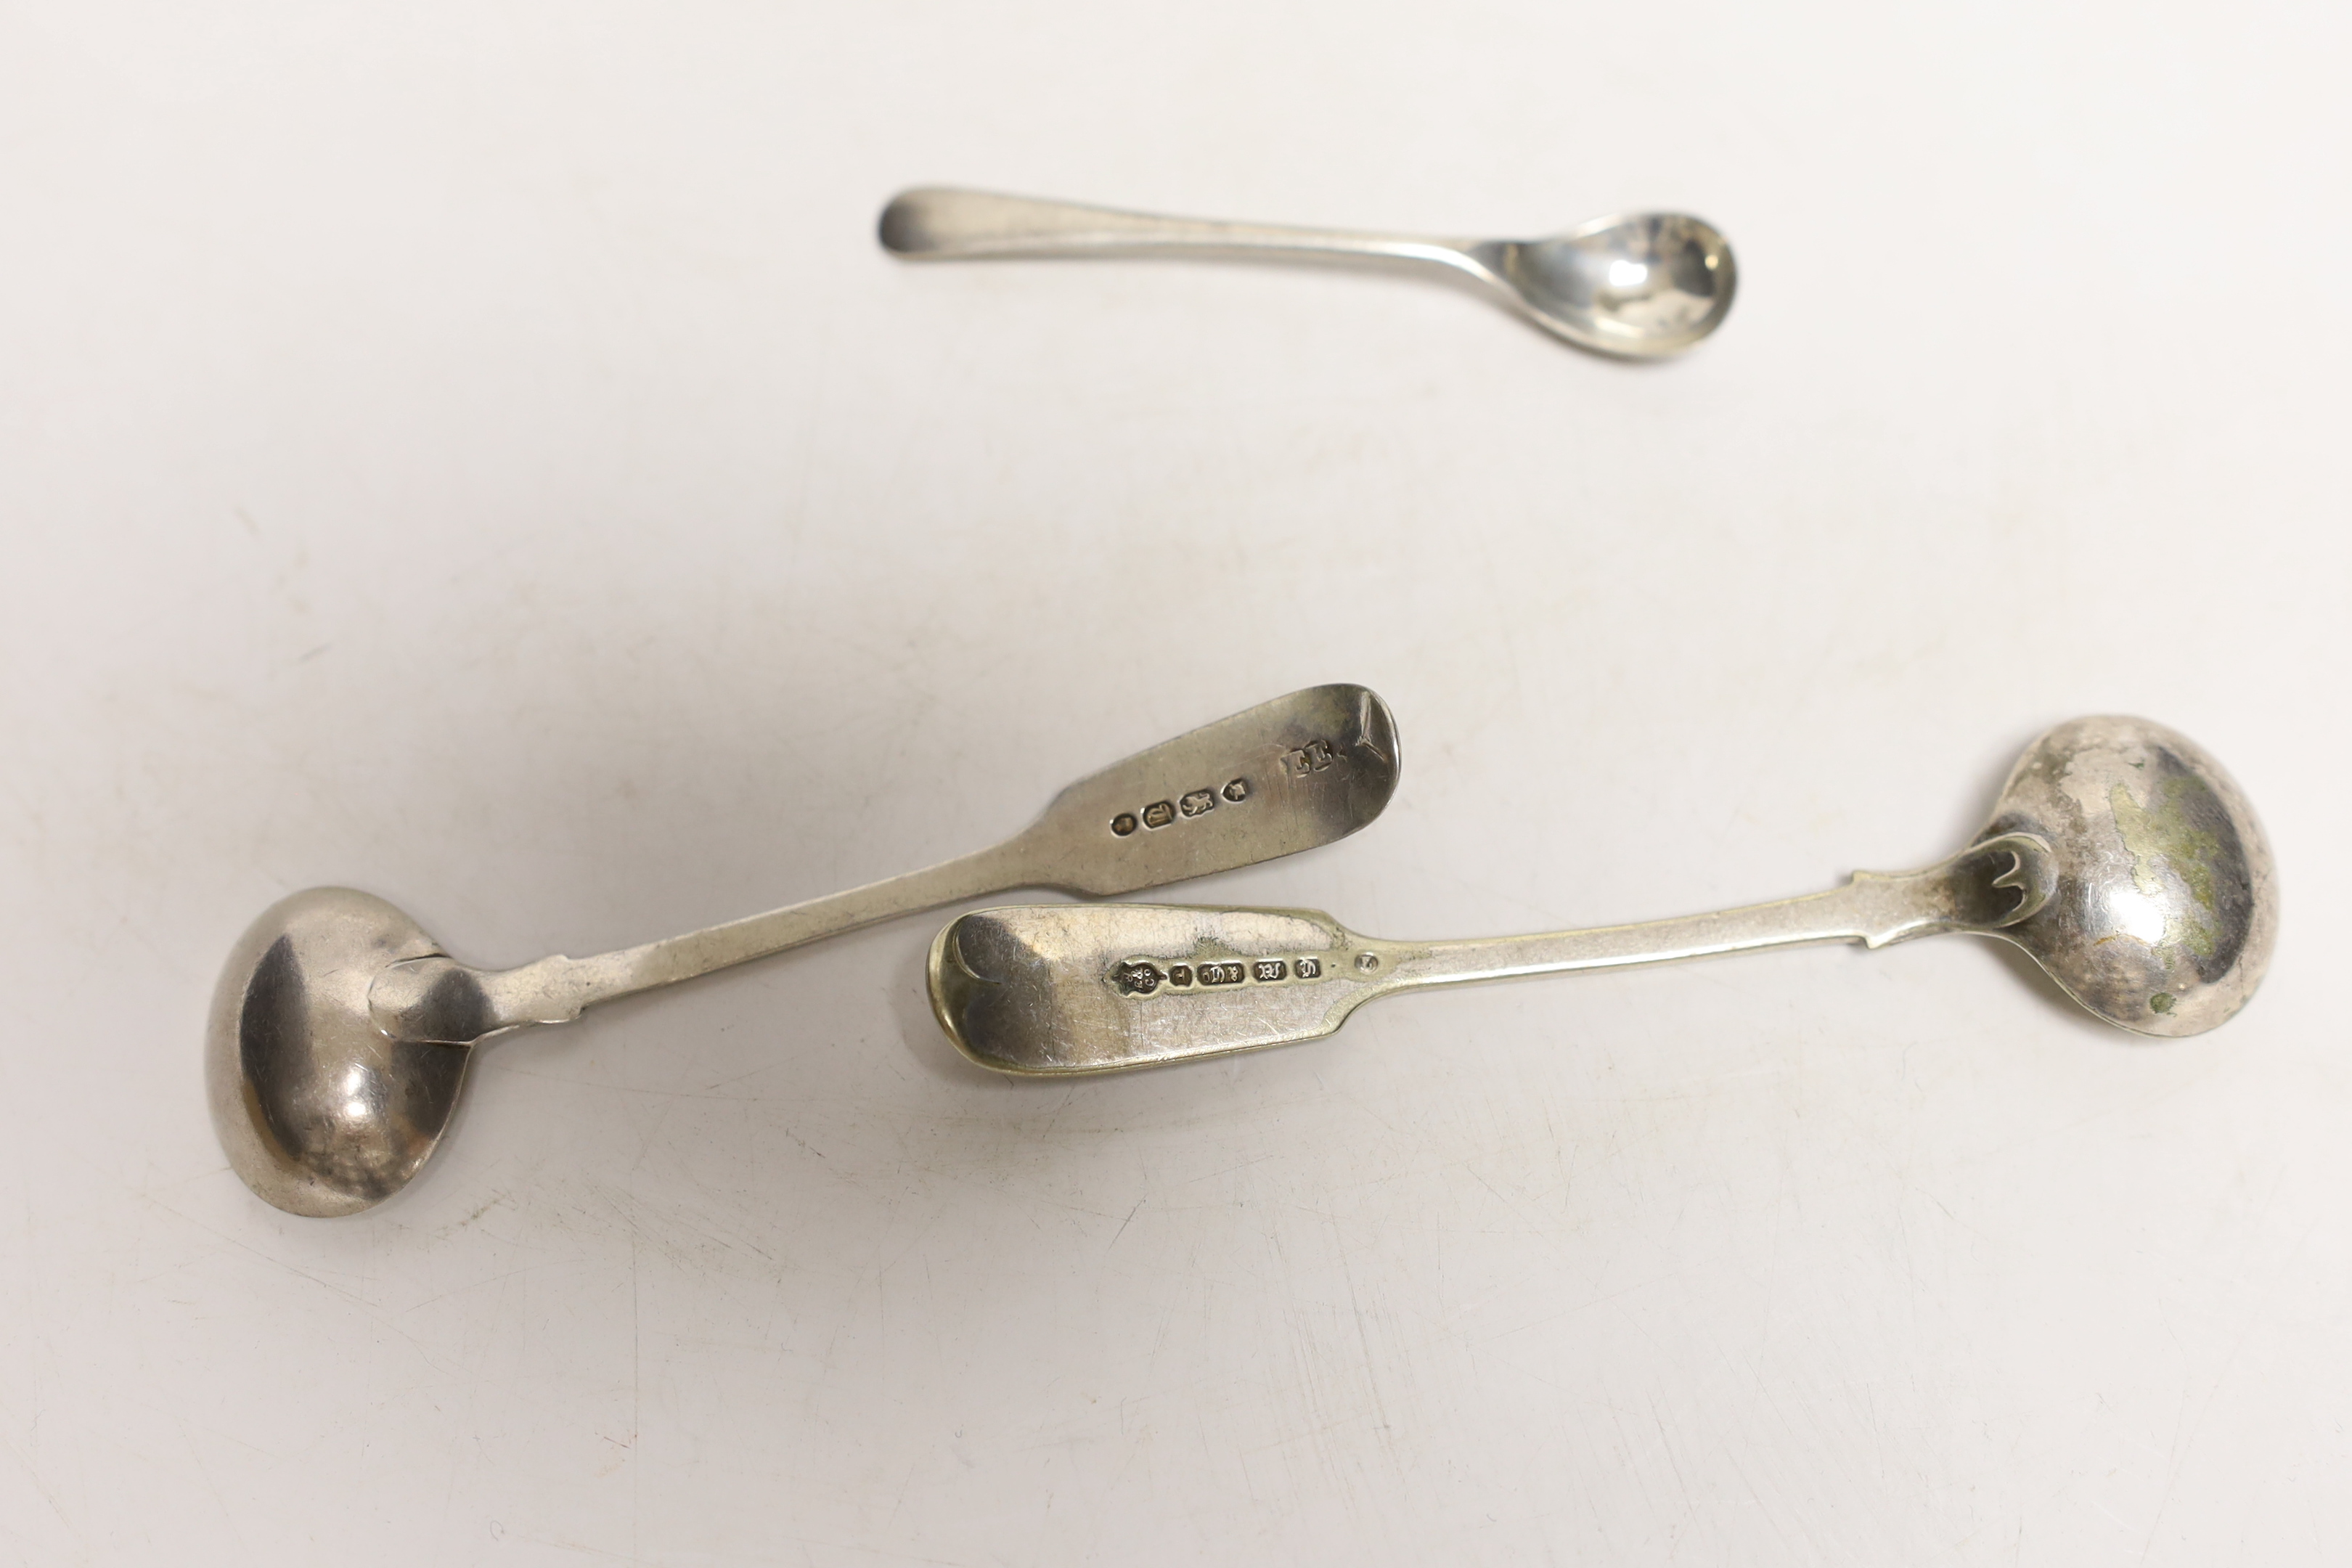 Four silver mustard ladles, including two 19th century, two plated ladles and an Edwardian silver mounted glass salts jar, London, 1905, 94mm.